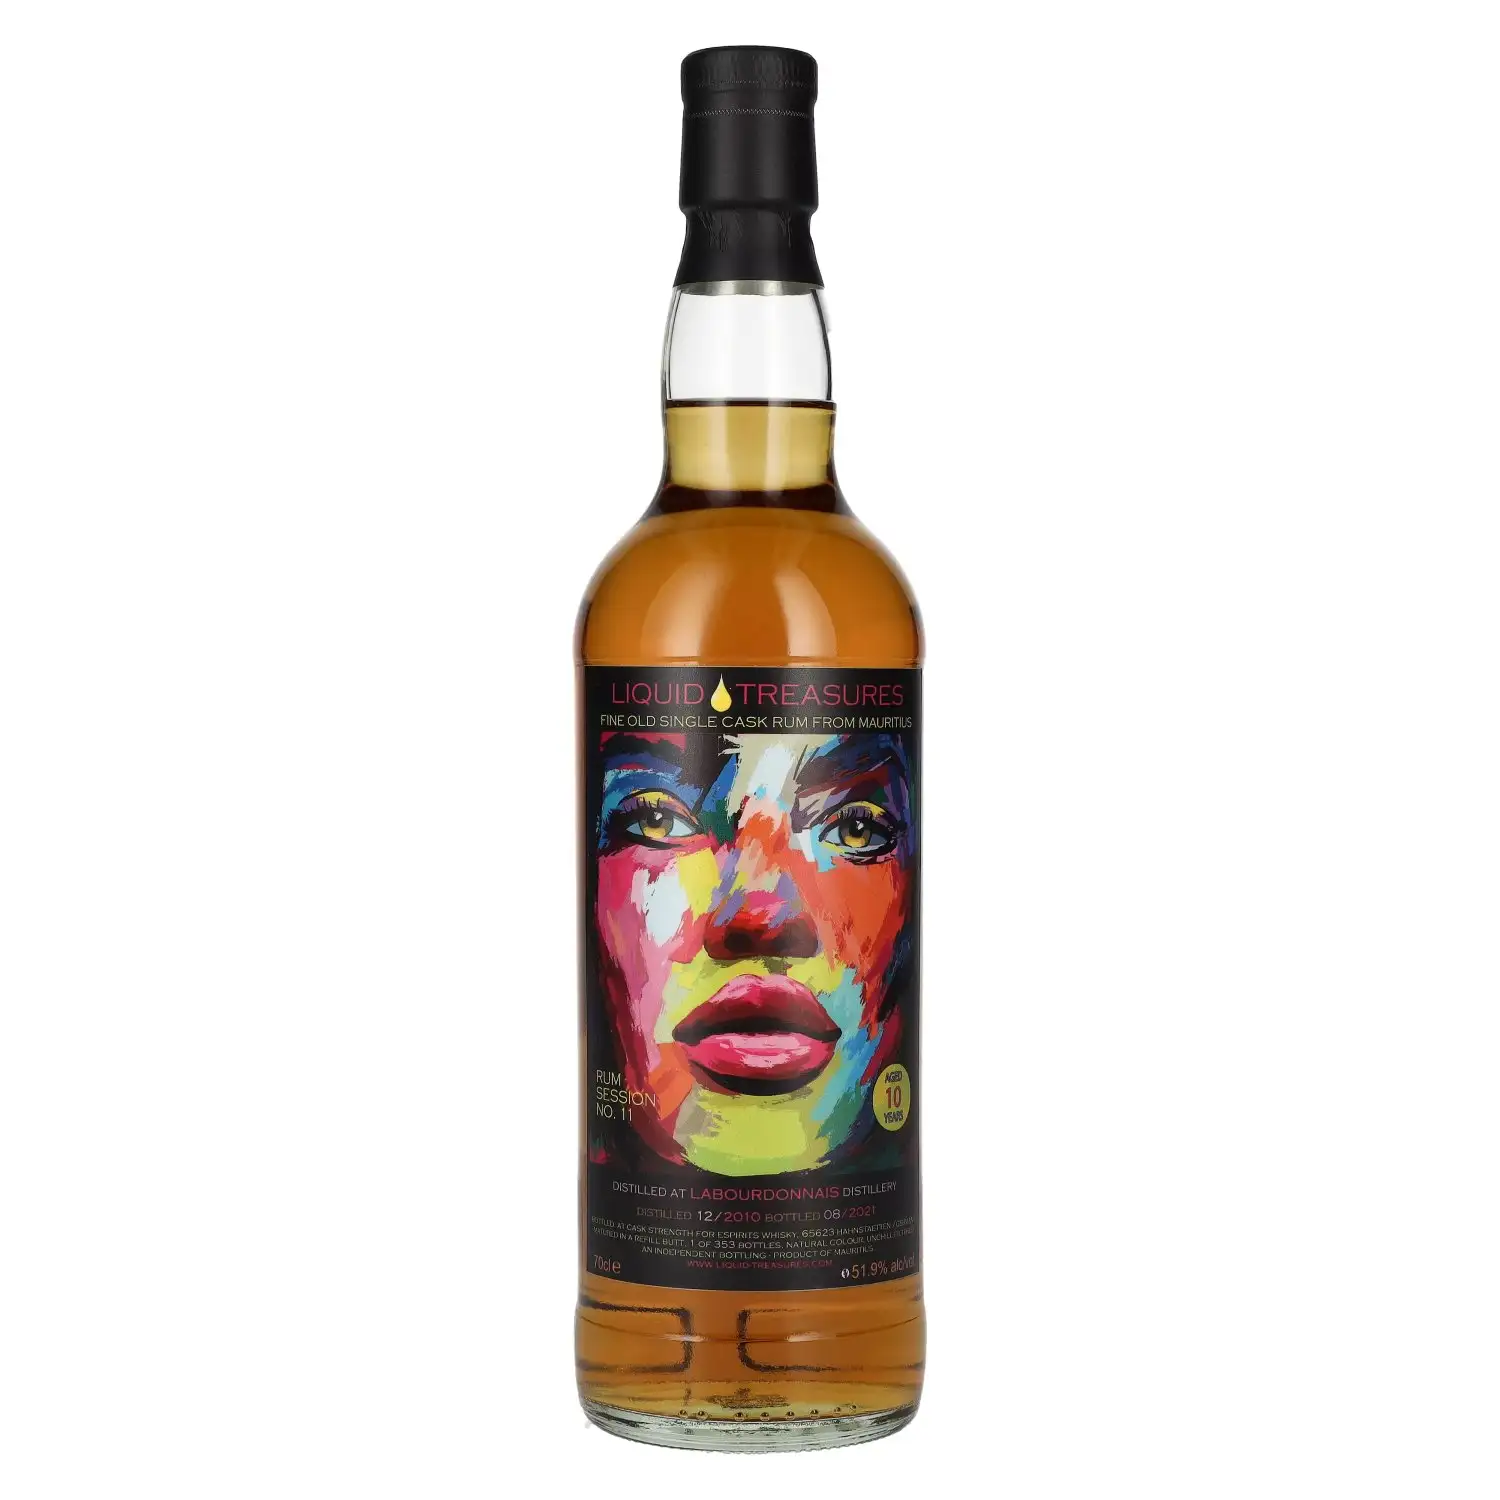 Image of the front of the bottle of the rum 2010